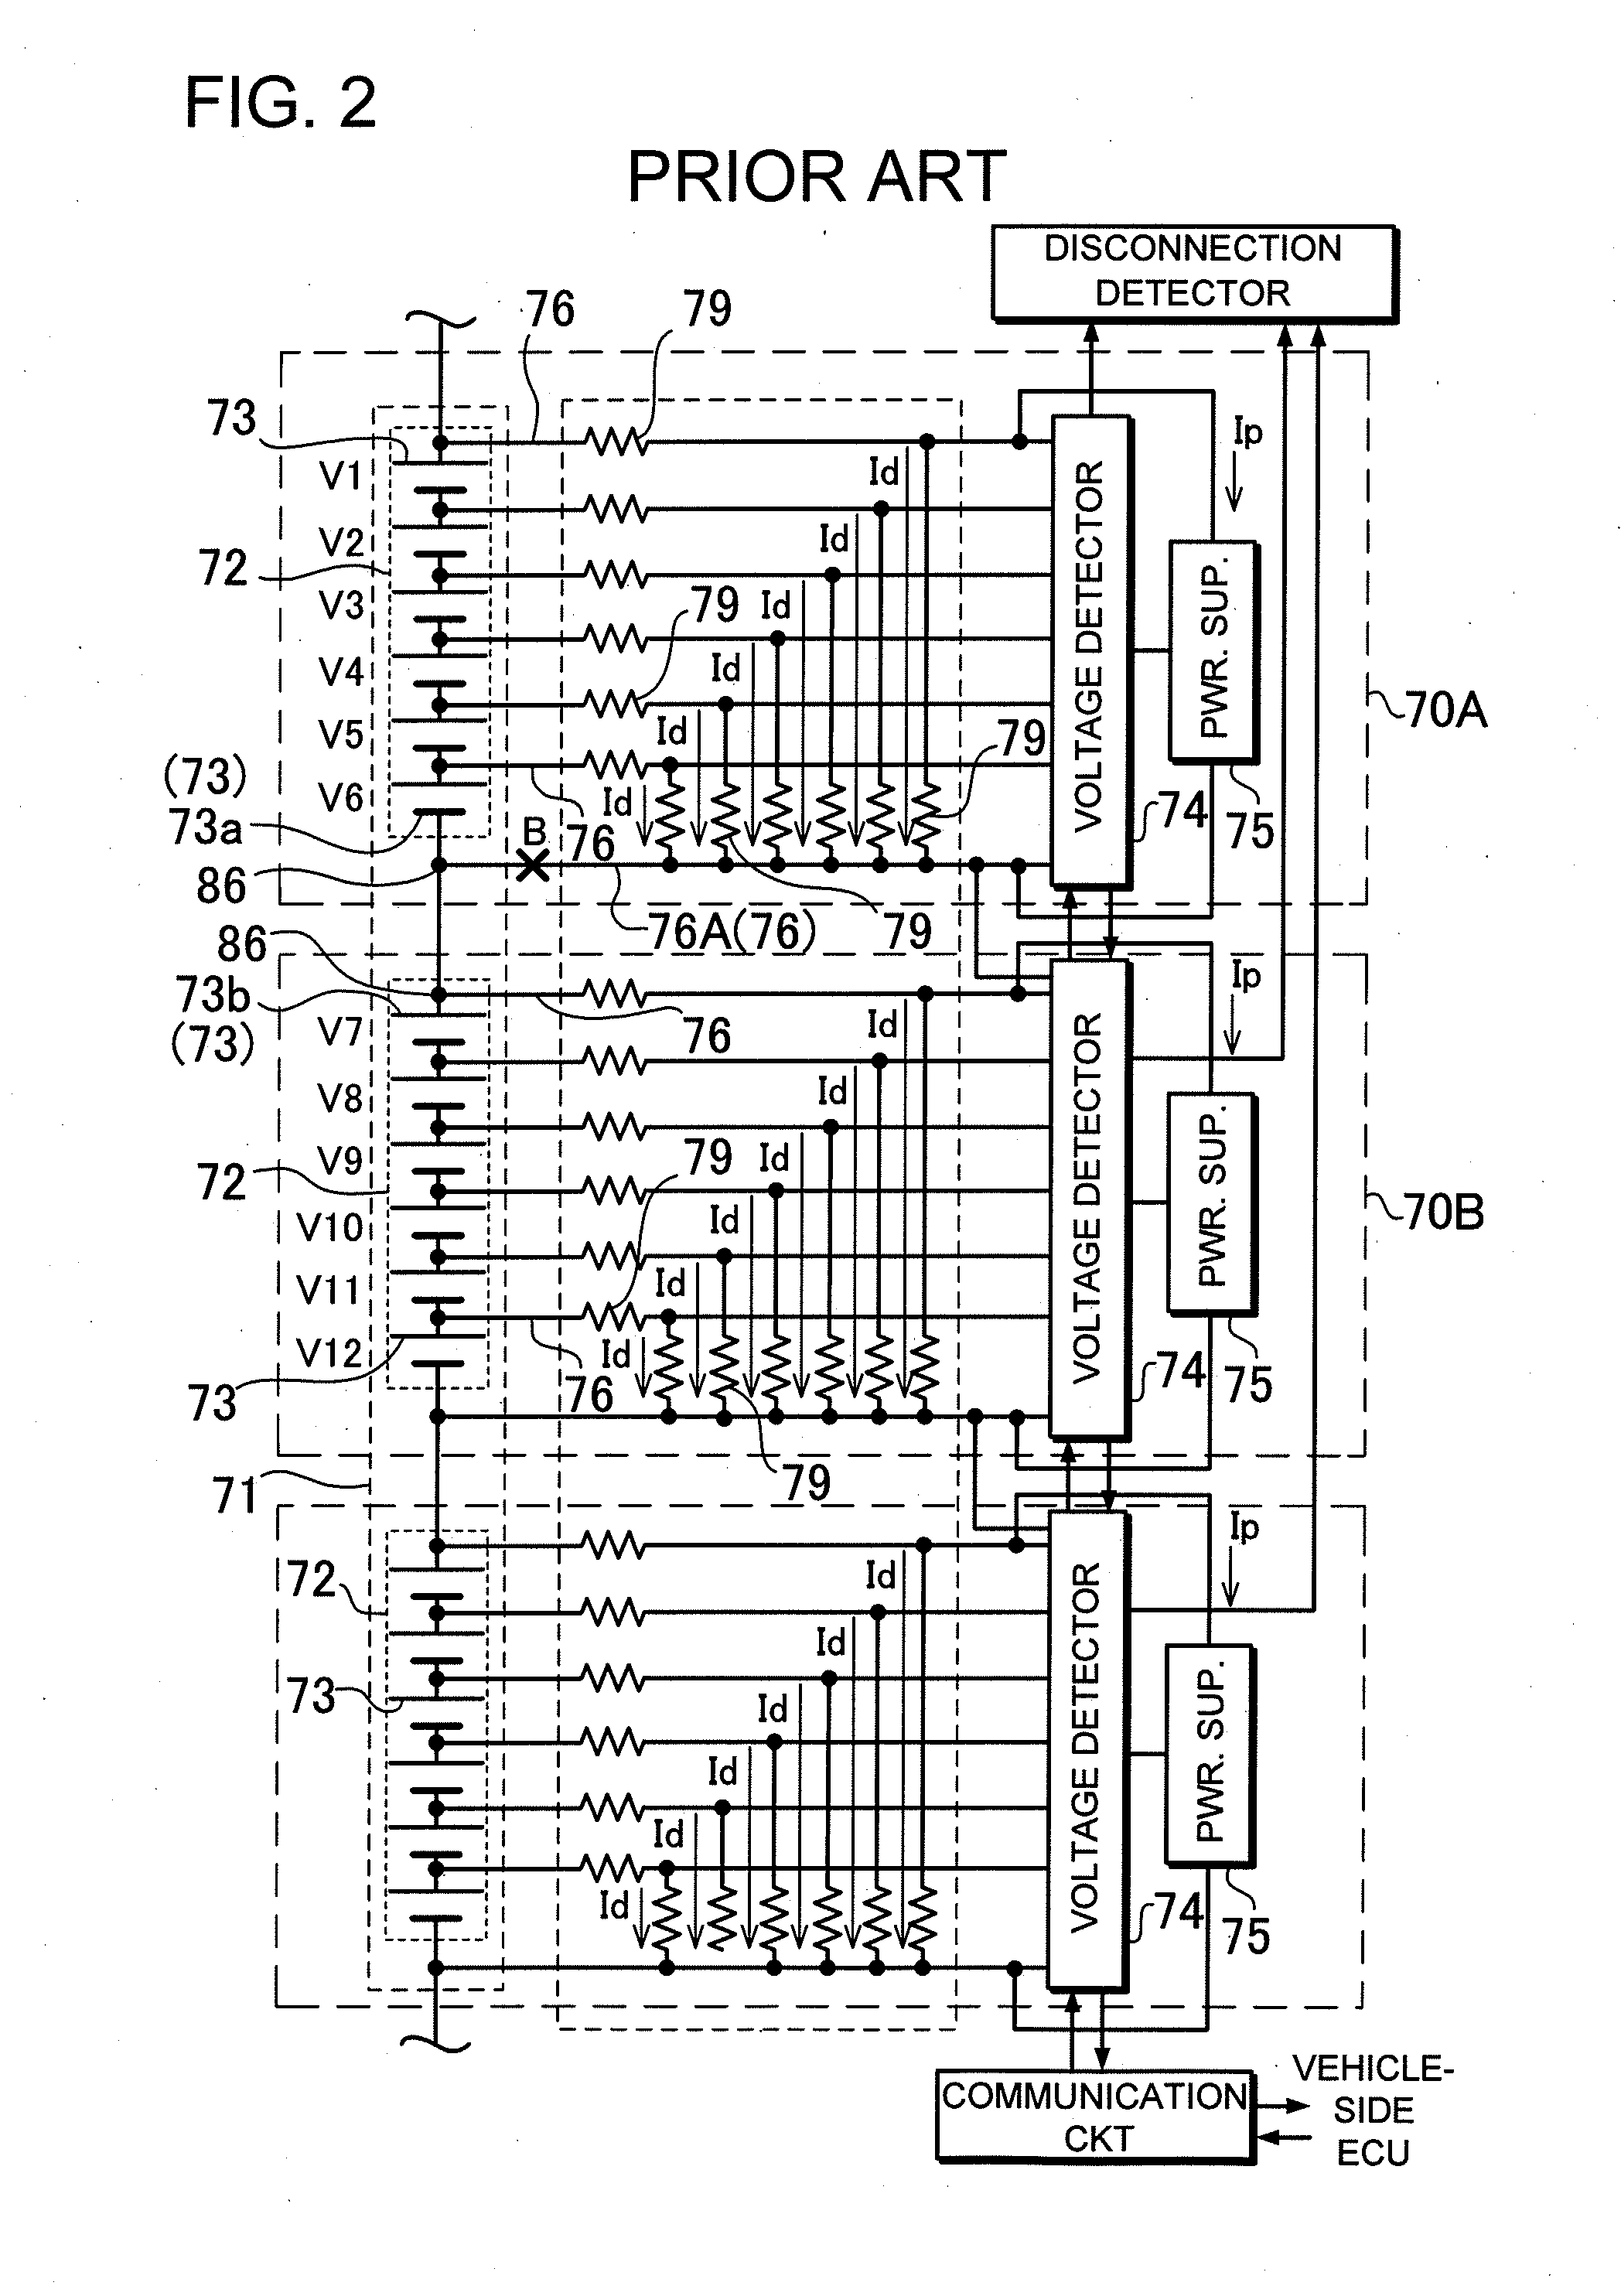 Power supply device for detecting disconnection of voltage detection lines